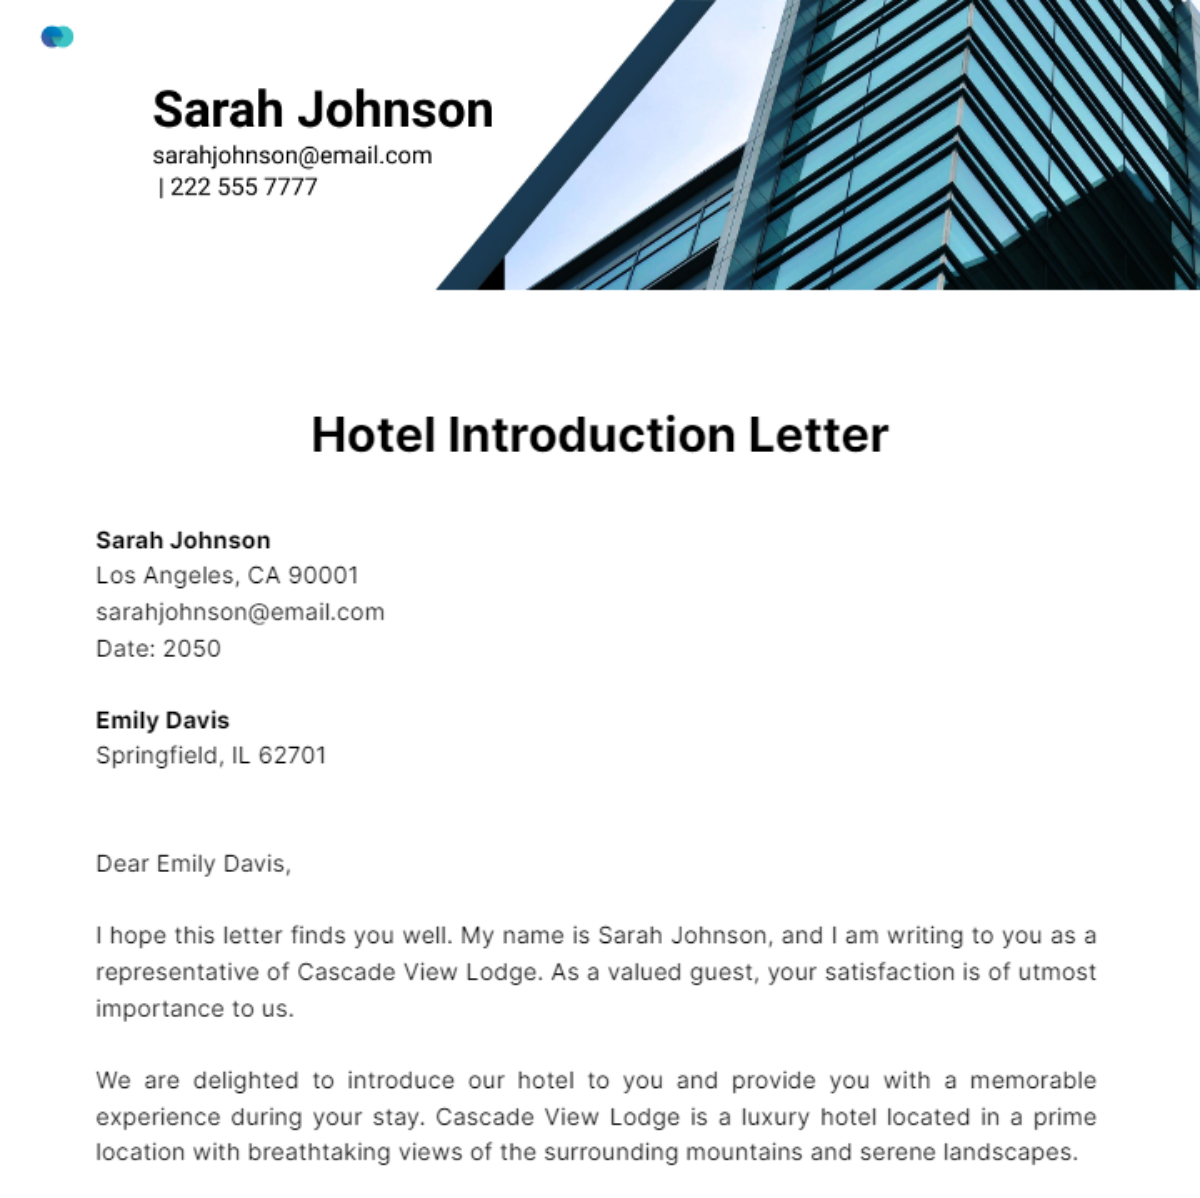 Hotel Introduction Letter Template